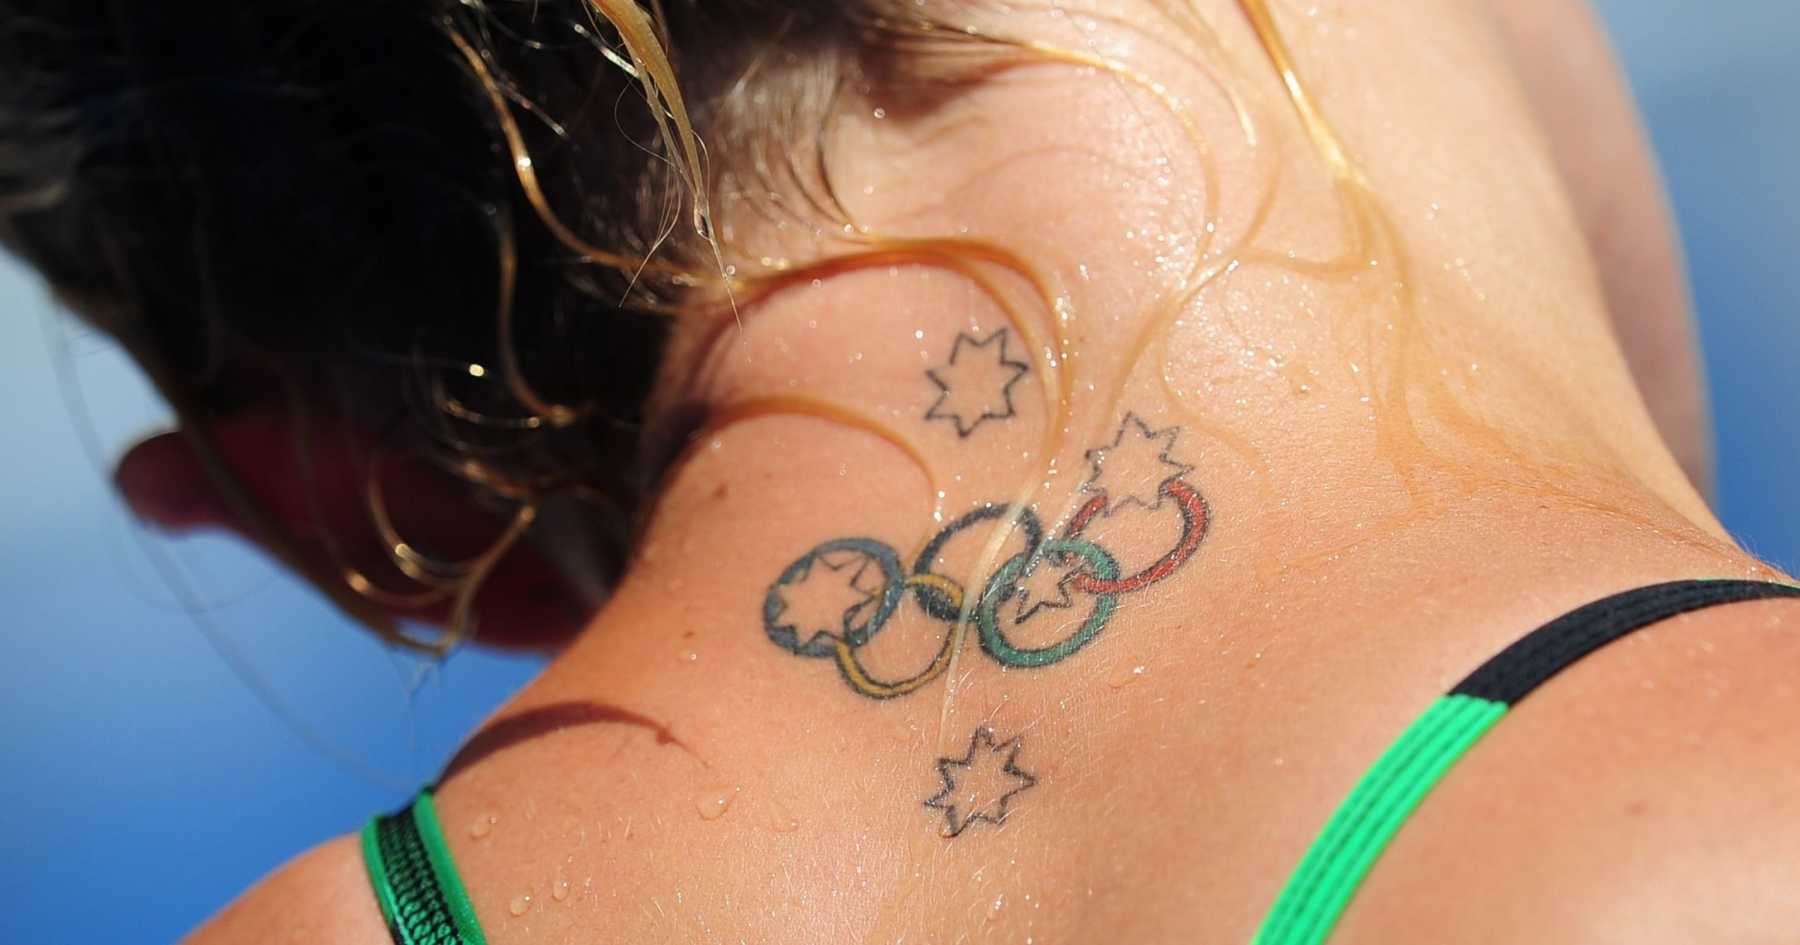 Ring tattoos, the new fashion fad at London Olympics - Times of India